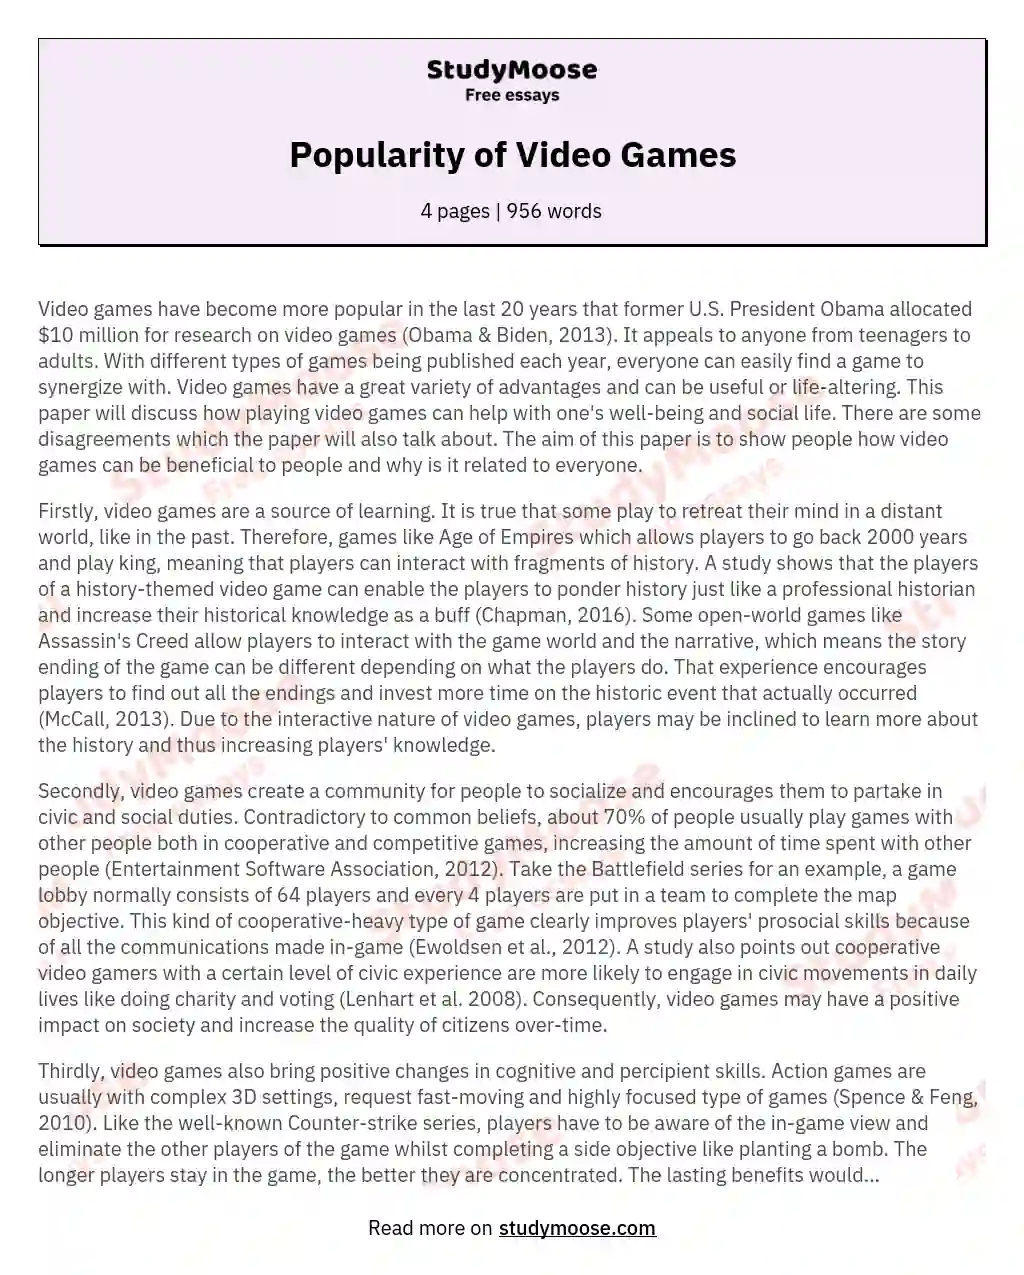 Popularity of Video Games